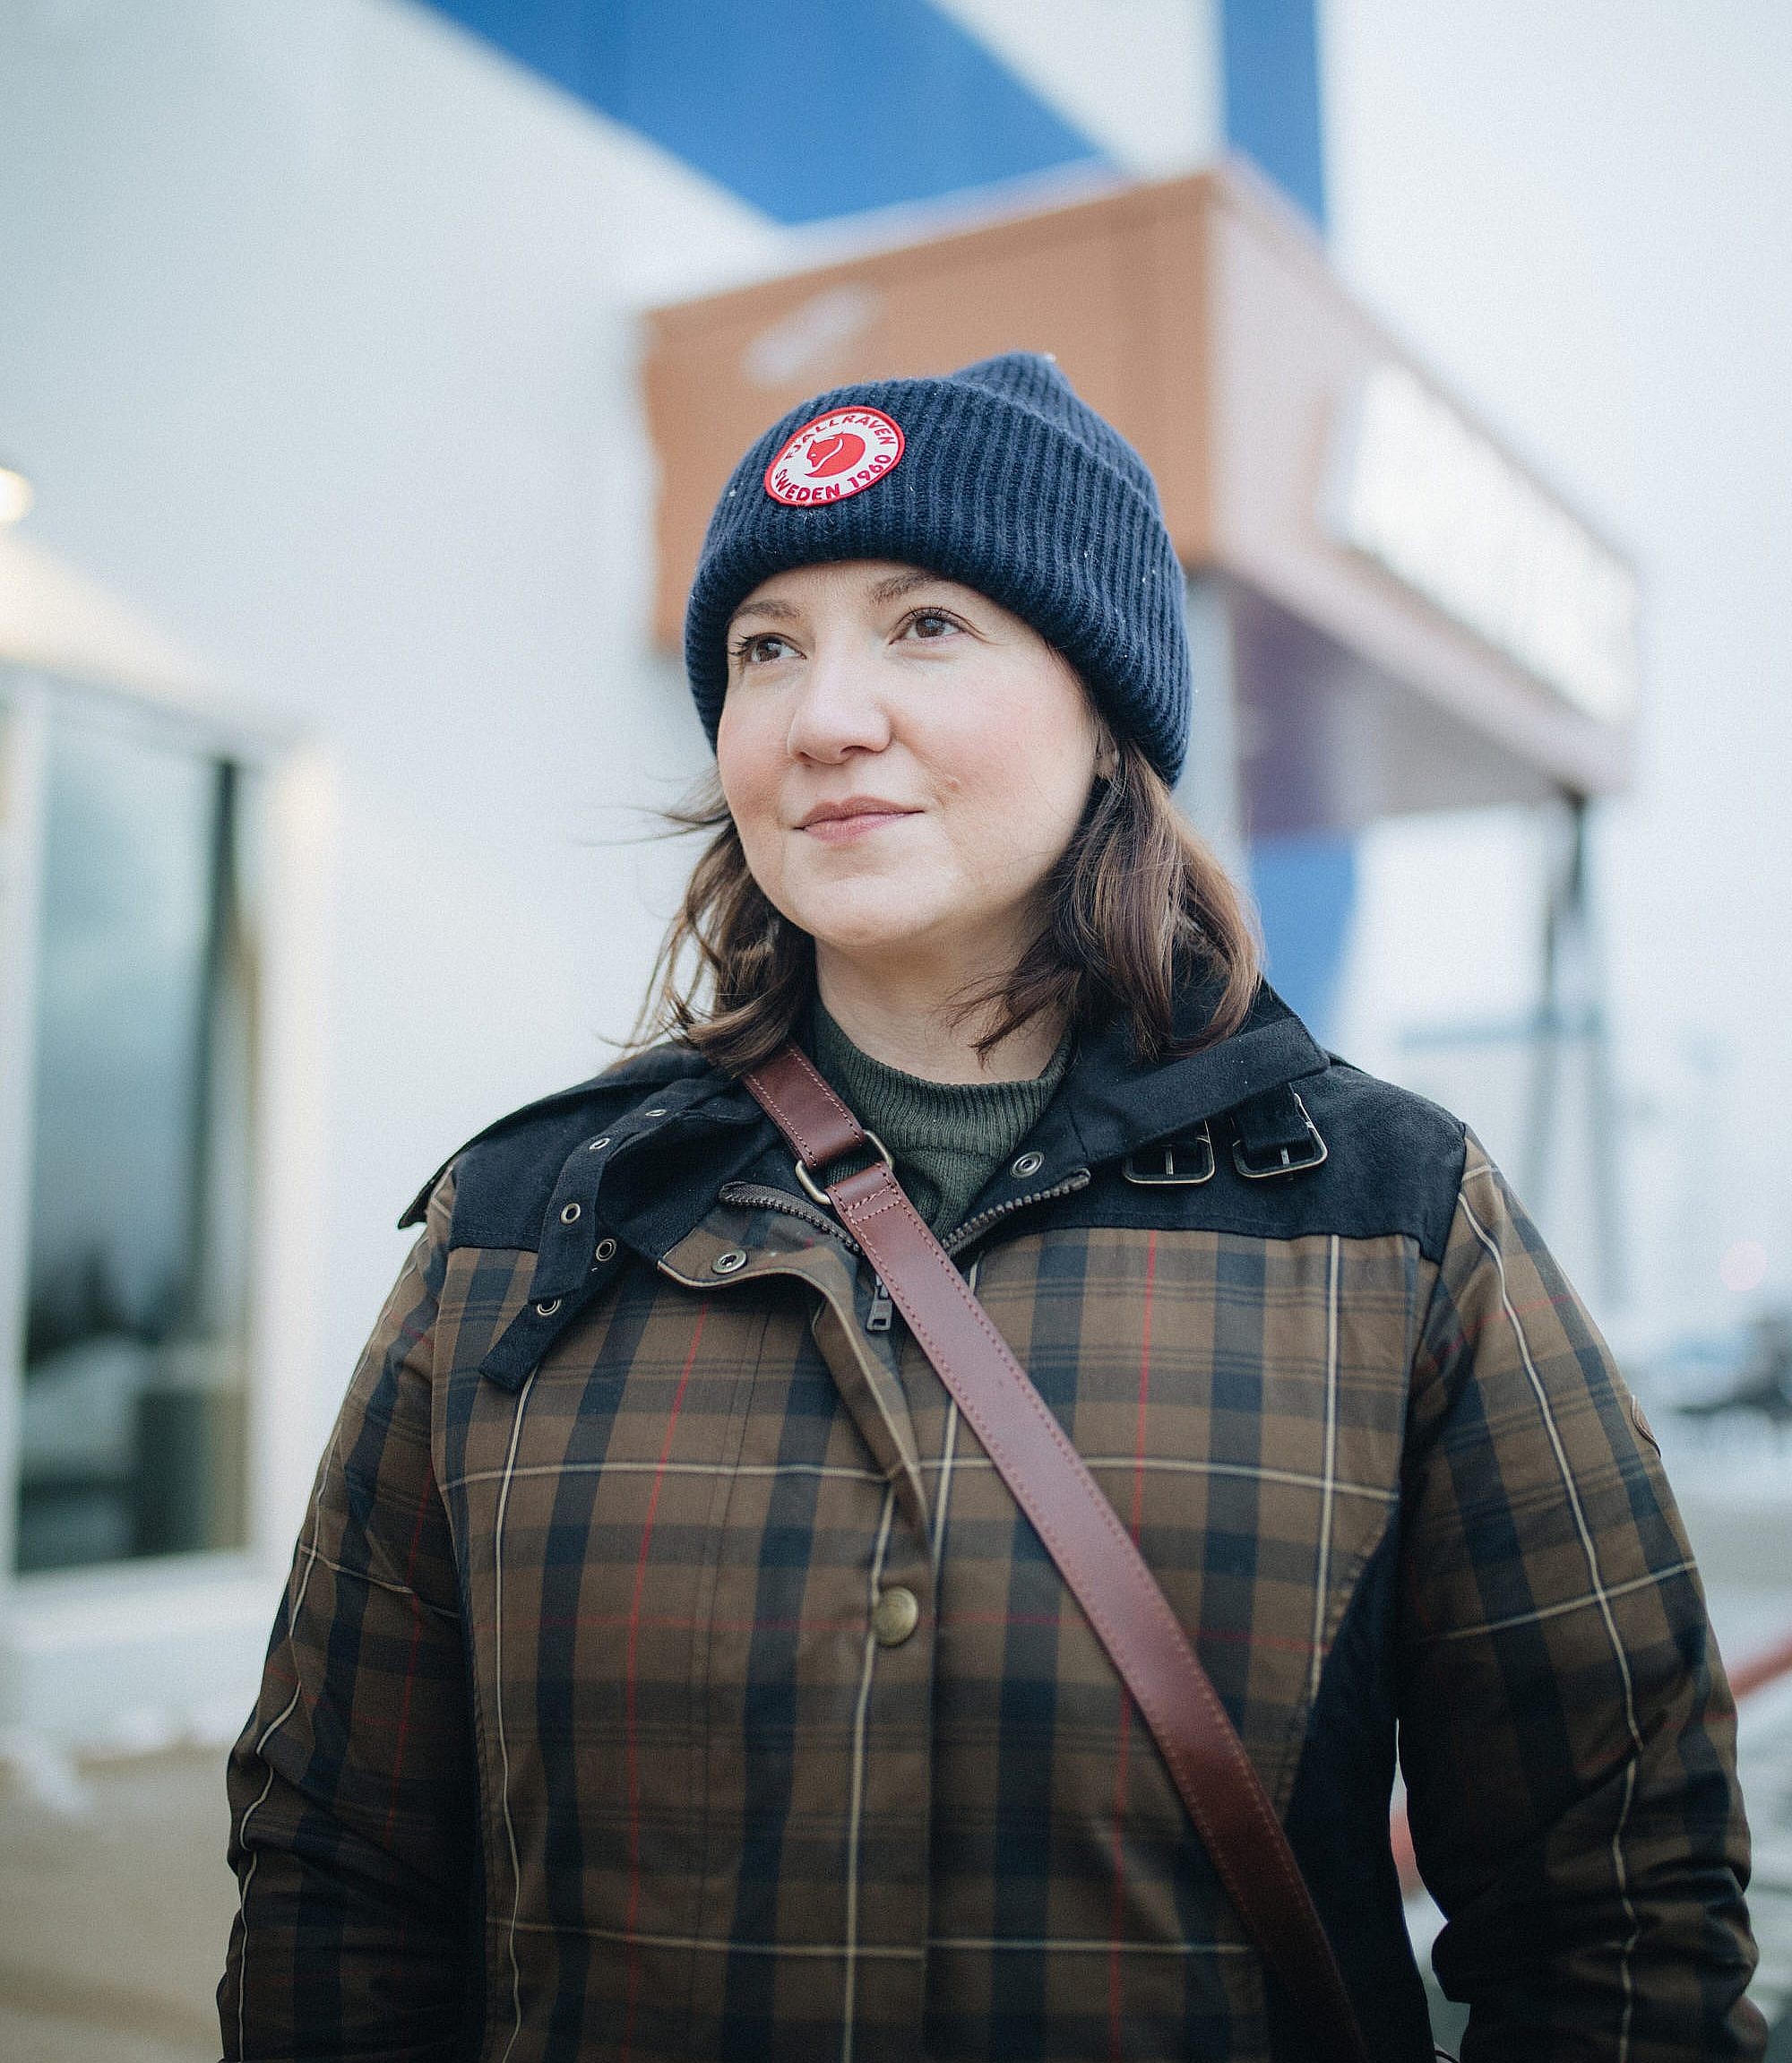 Amanda Young is a cook on the Terra Nova offshore platform. For her, Bay du Nord represents a future for an industry that’s given her economic independence